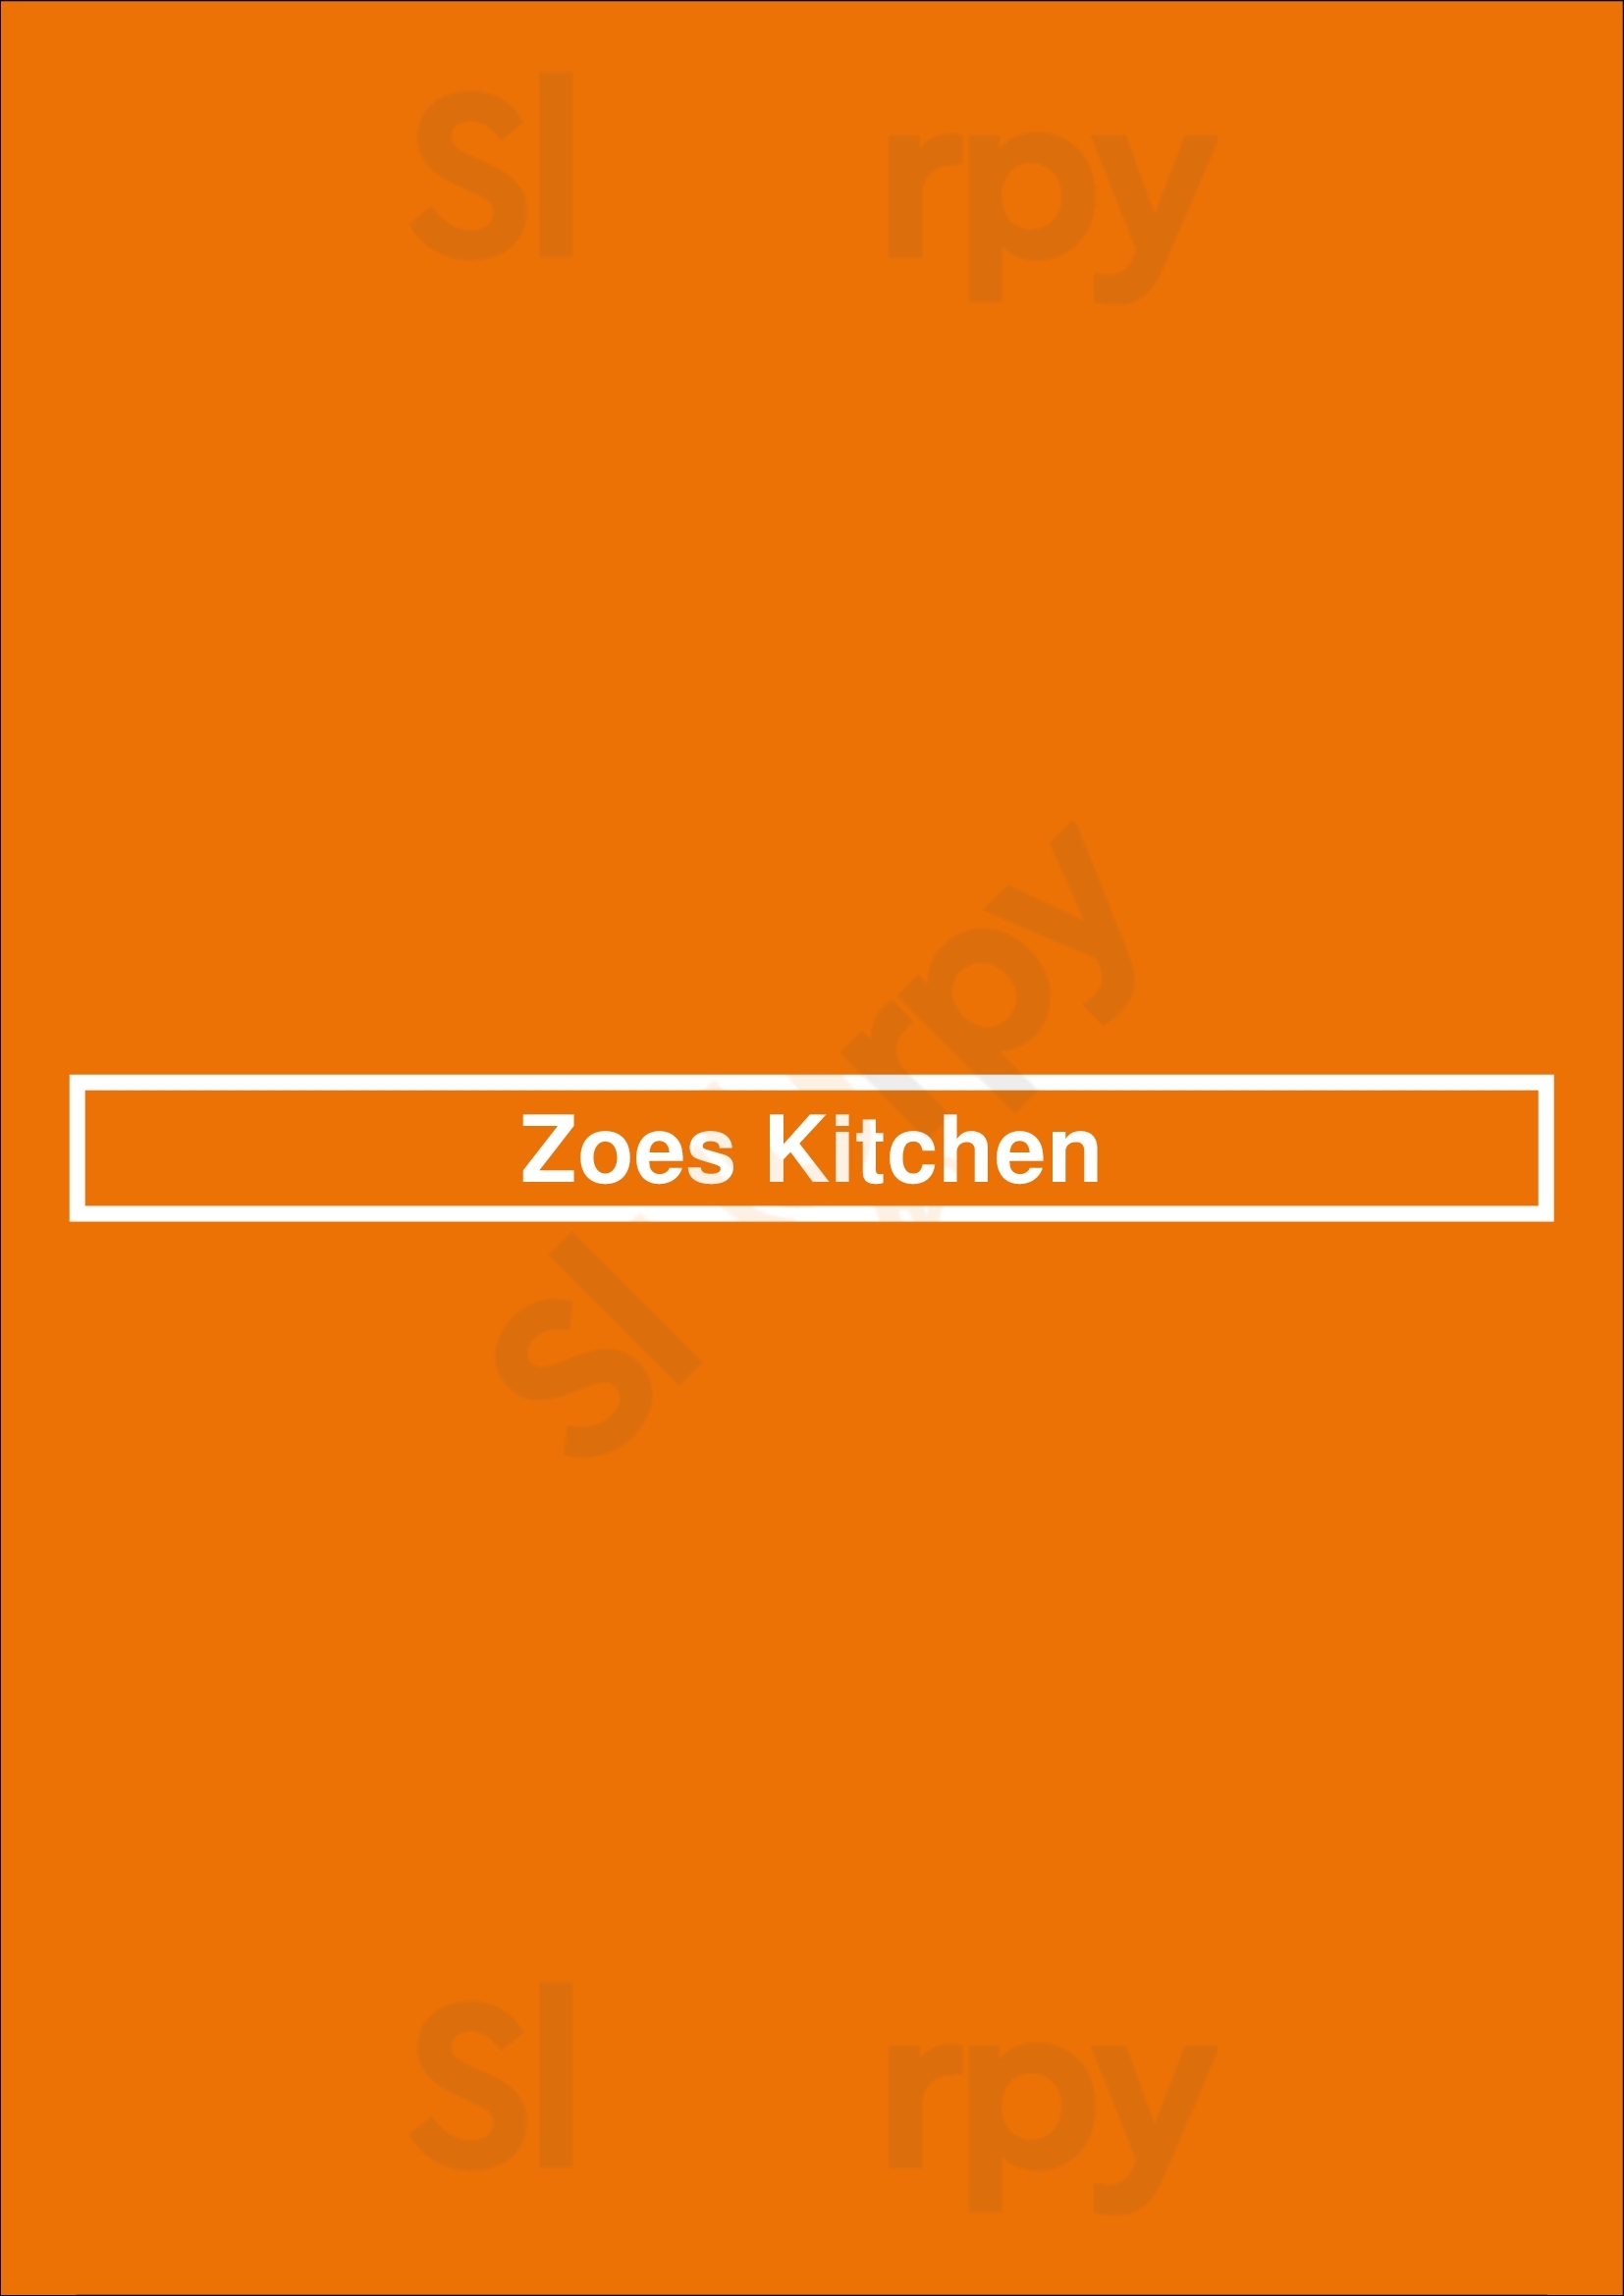 Zoes Kitchen Knoxville Menu - 1